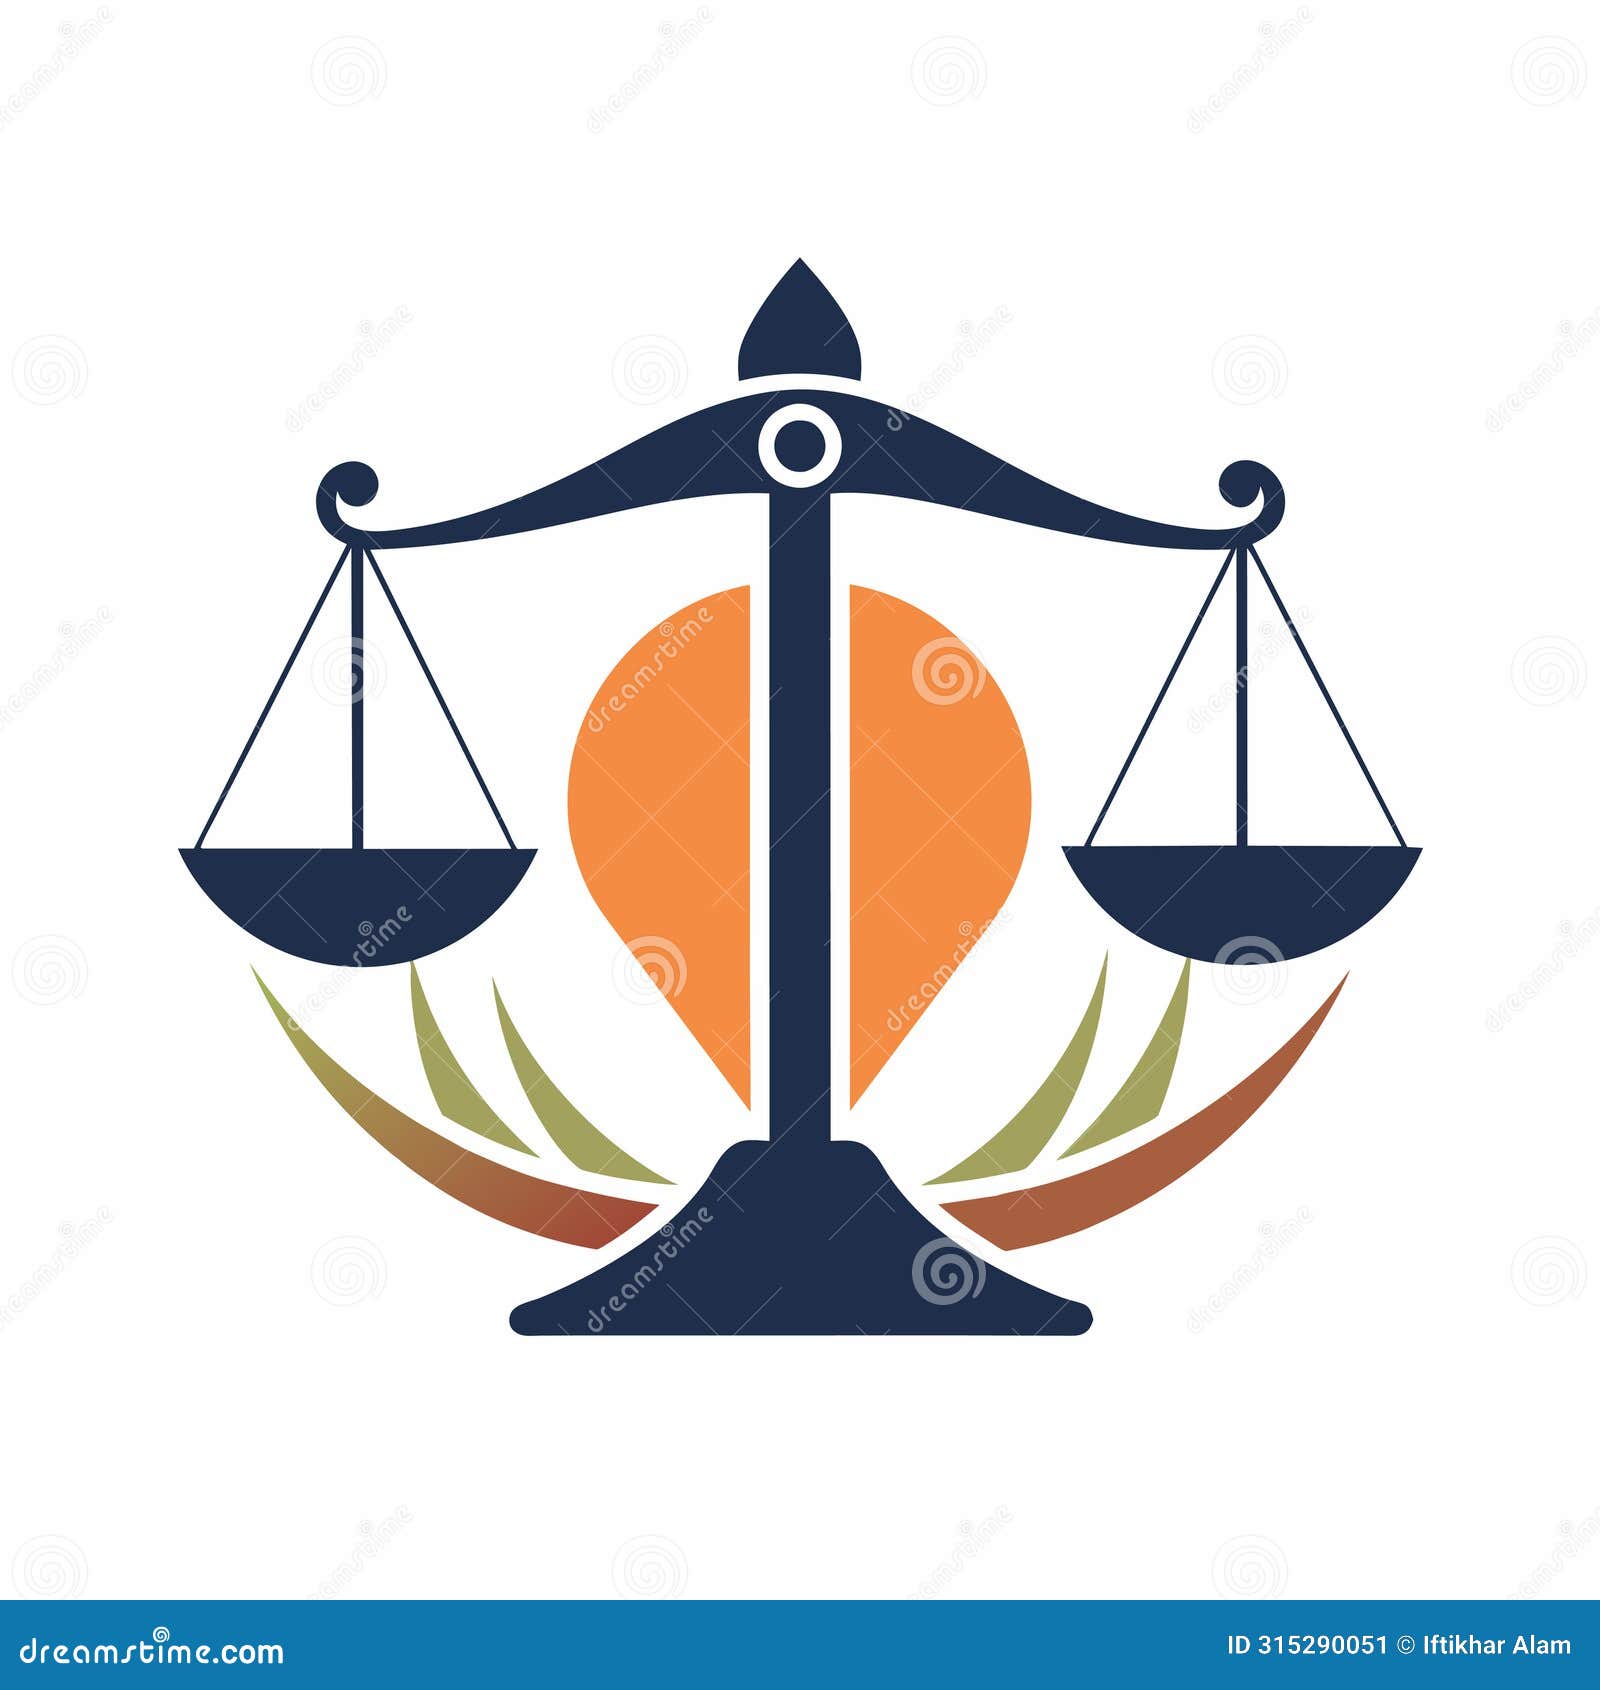 a modern interpretation of justice scales set against a backdrop of a bright sun, modern interpretation of justice scales,